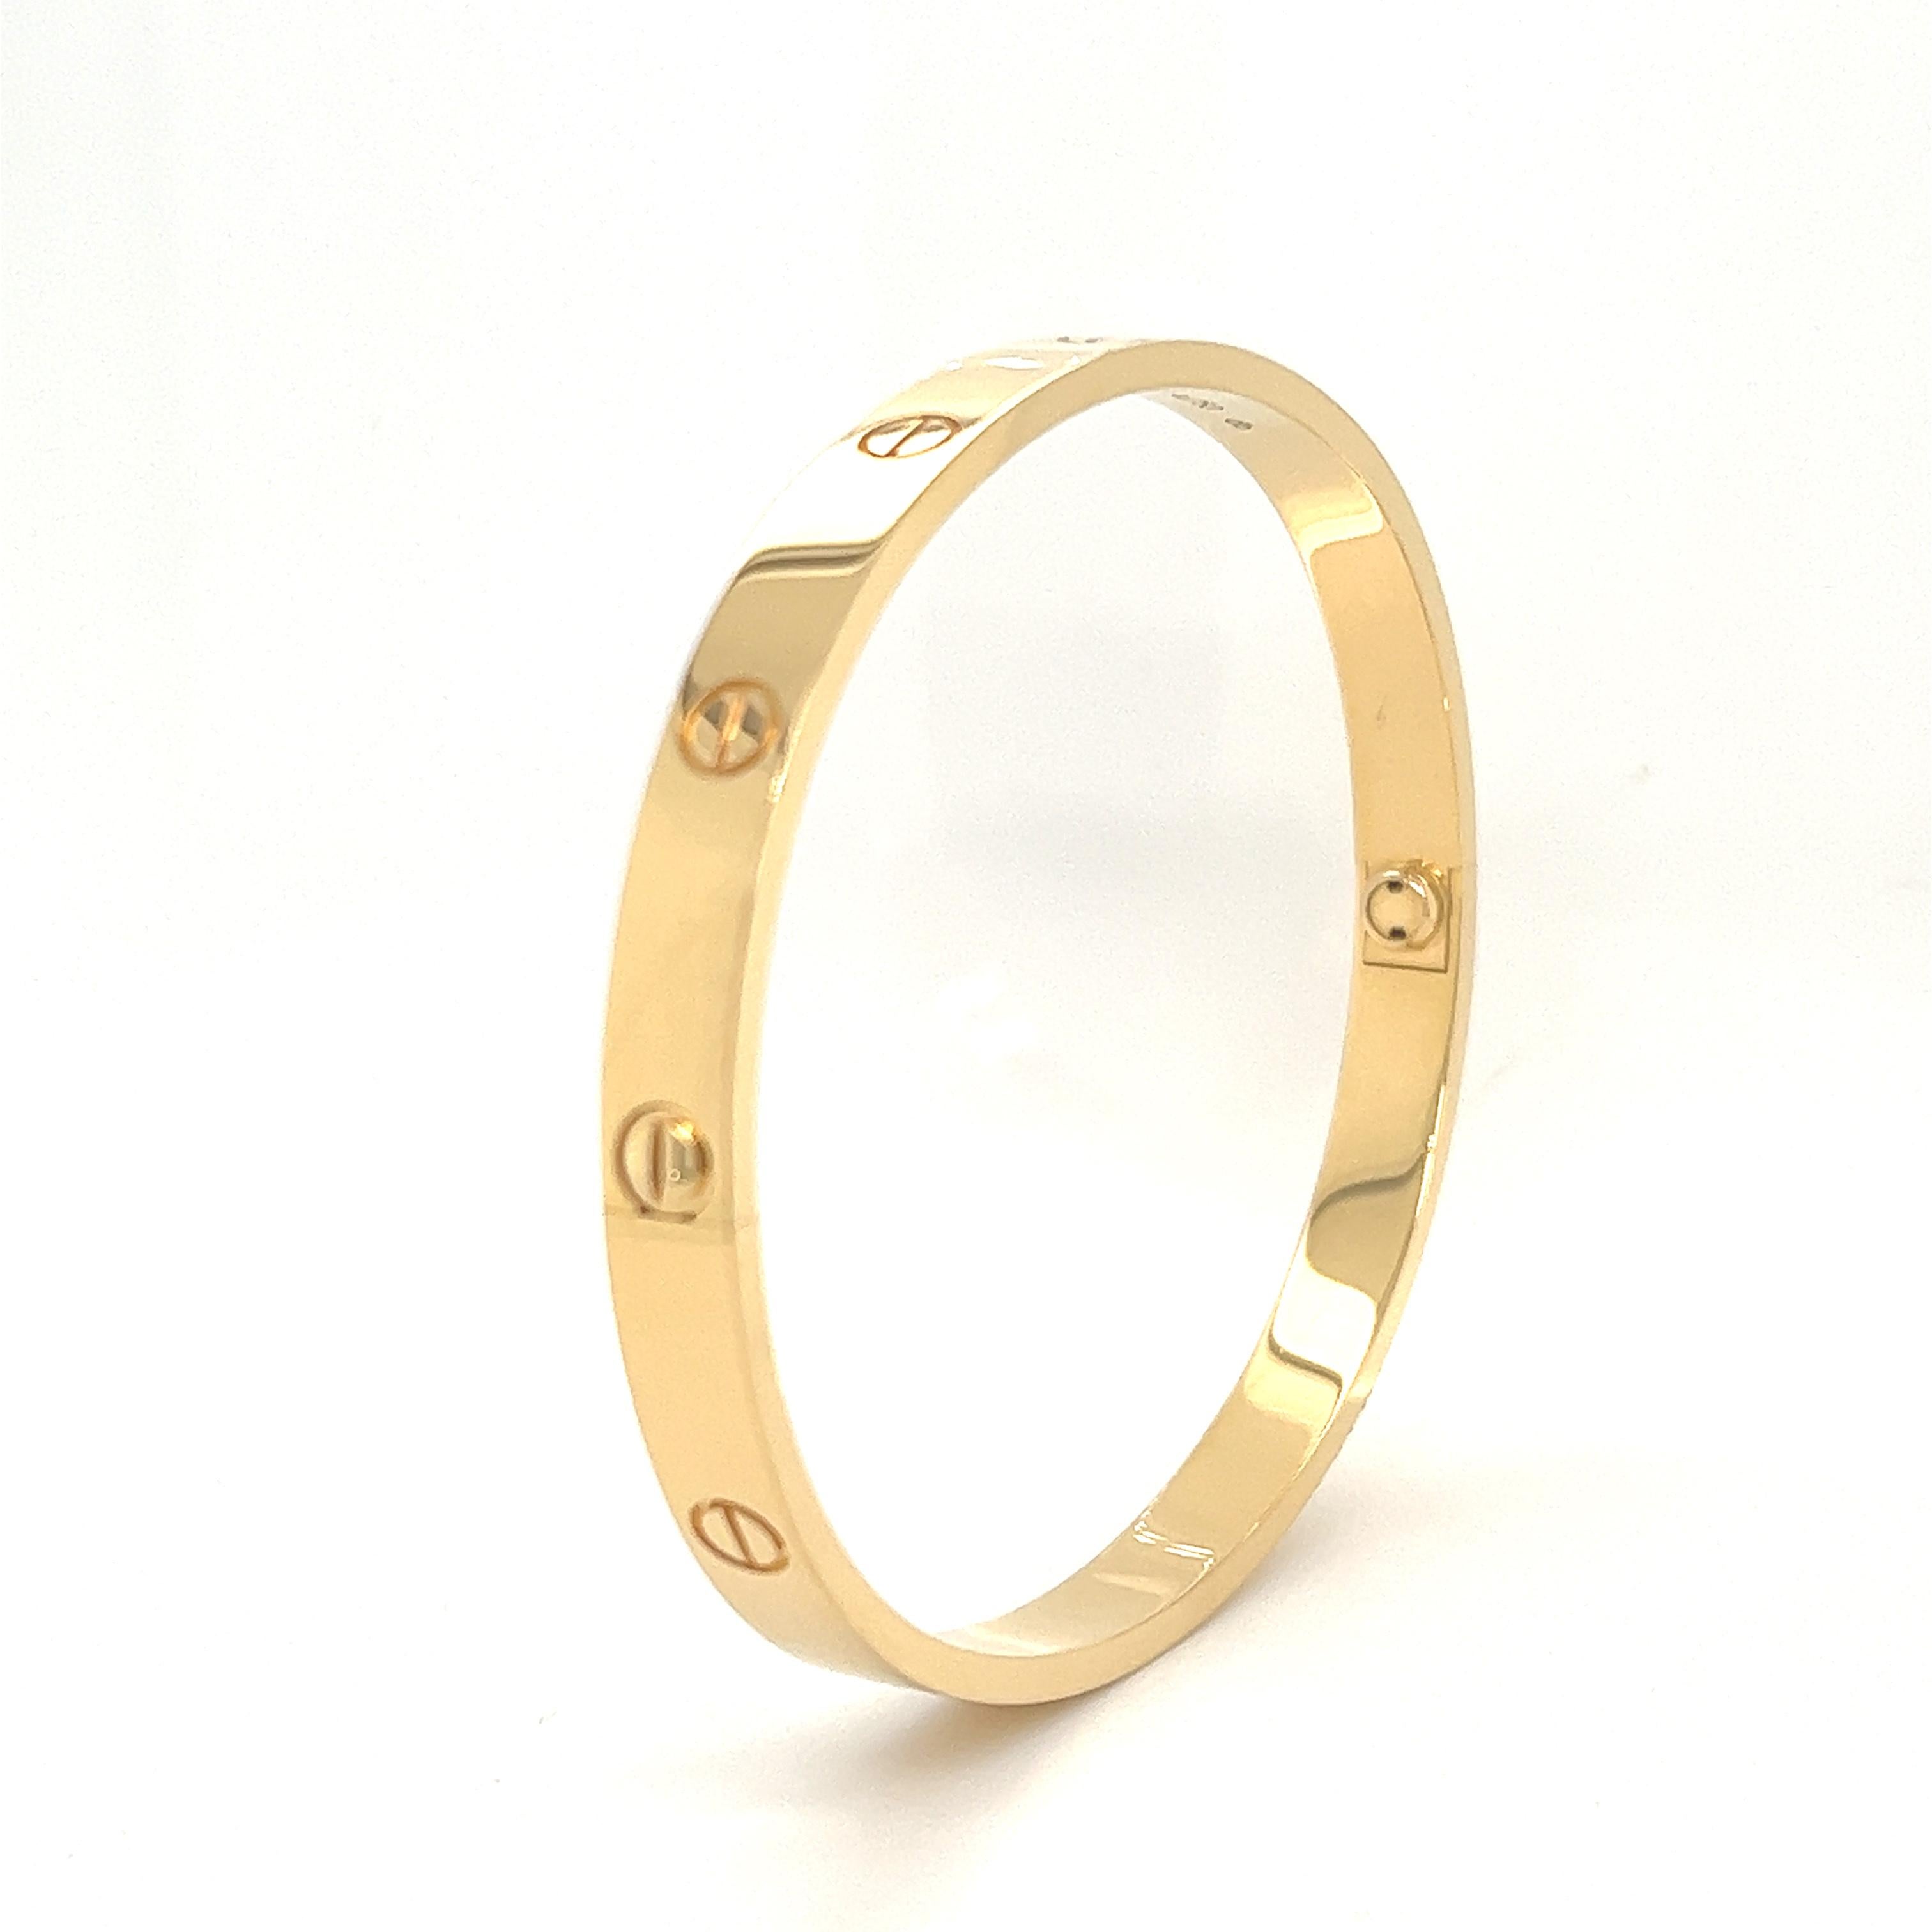 A signature 18k yellow gold Cartier bracelet from the Love collection. The bracelet is a size 20 and has a gross weight of 39.6 grams. Original Cartier box, key and paperwork all included in purchase. This bracelet is in pristine condition as paper